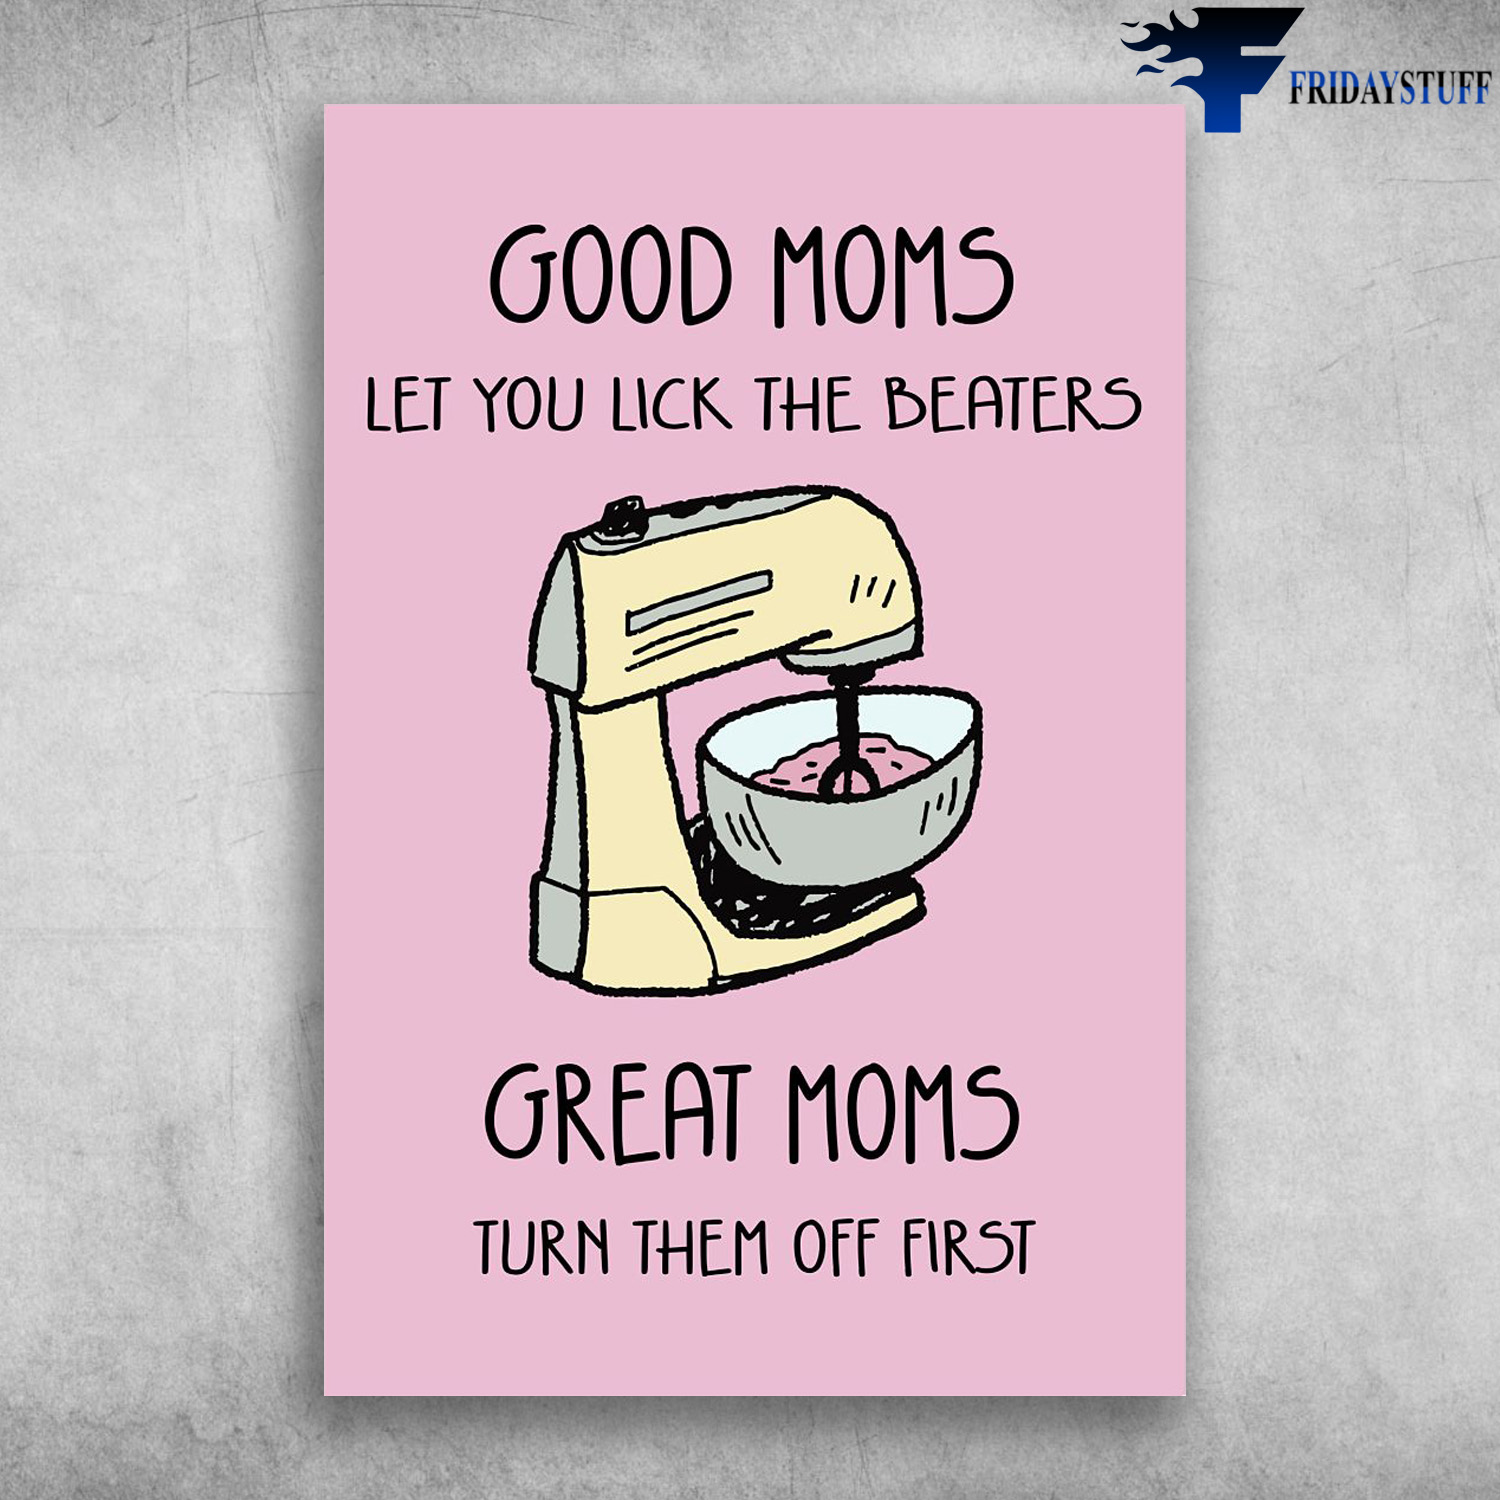 https://fridaystuff.com/wp-content/uploads/2021/04/Baker-Machine-Good-Moms-Let-You-Lick-The-Beaters-Great-Moms-Turn-Them-Off-First-Gift-For-Mothers-Day.jpg